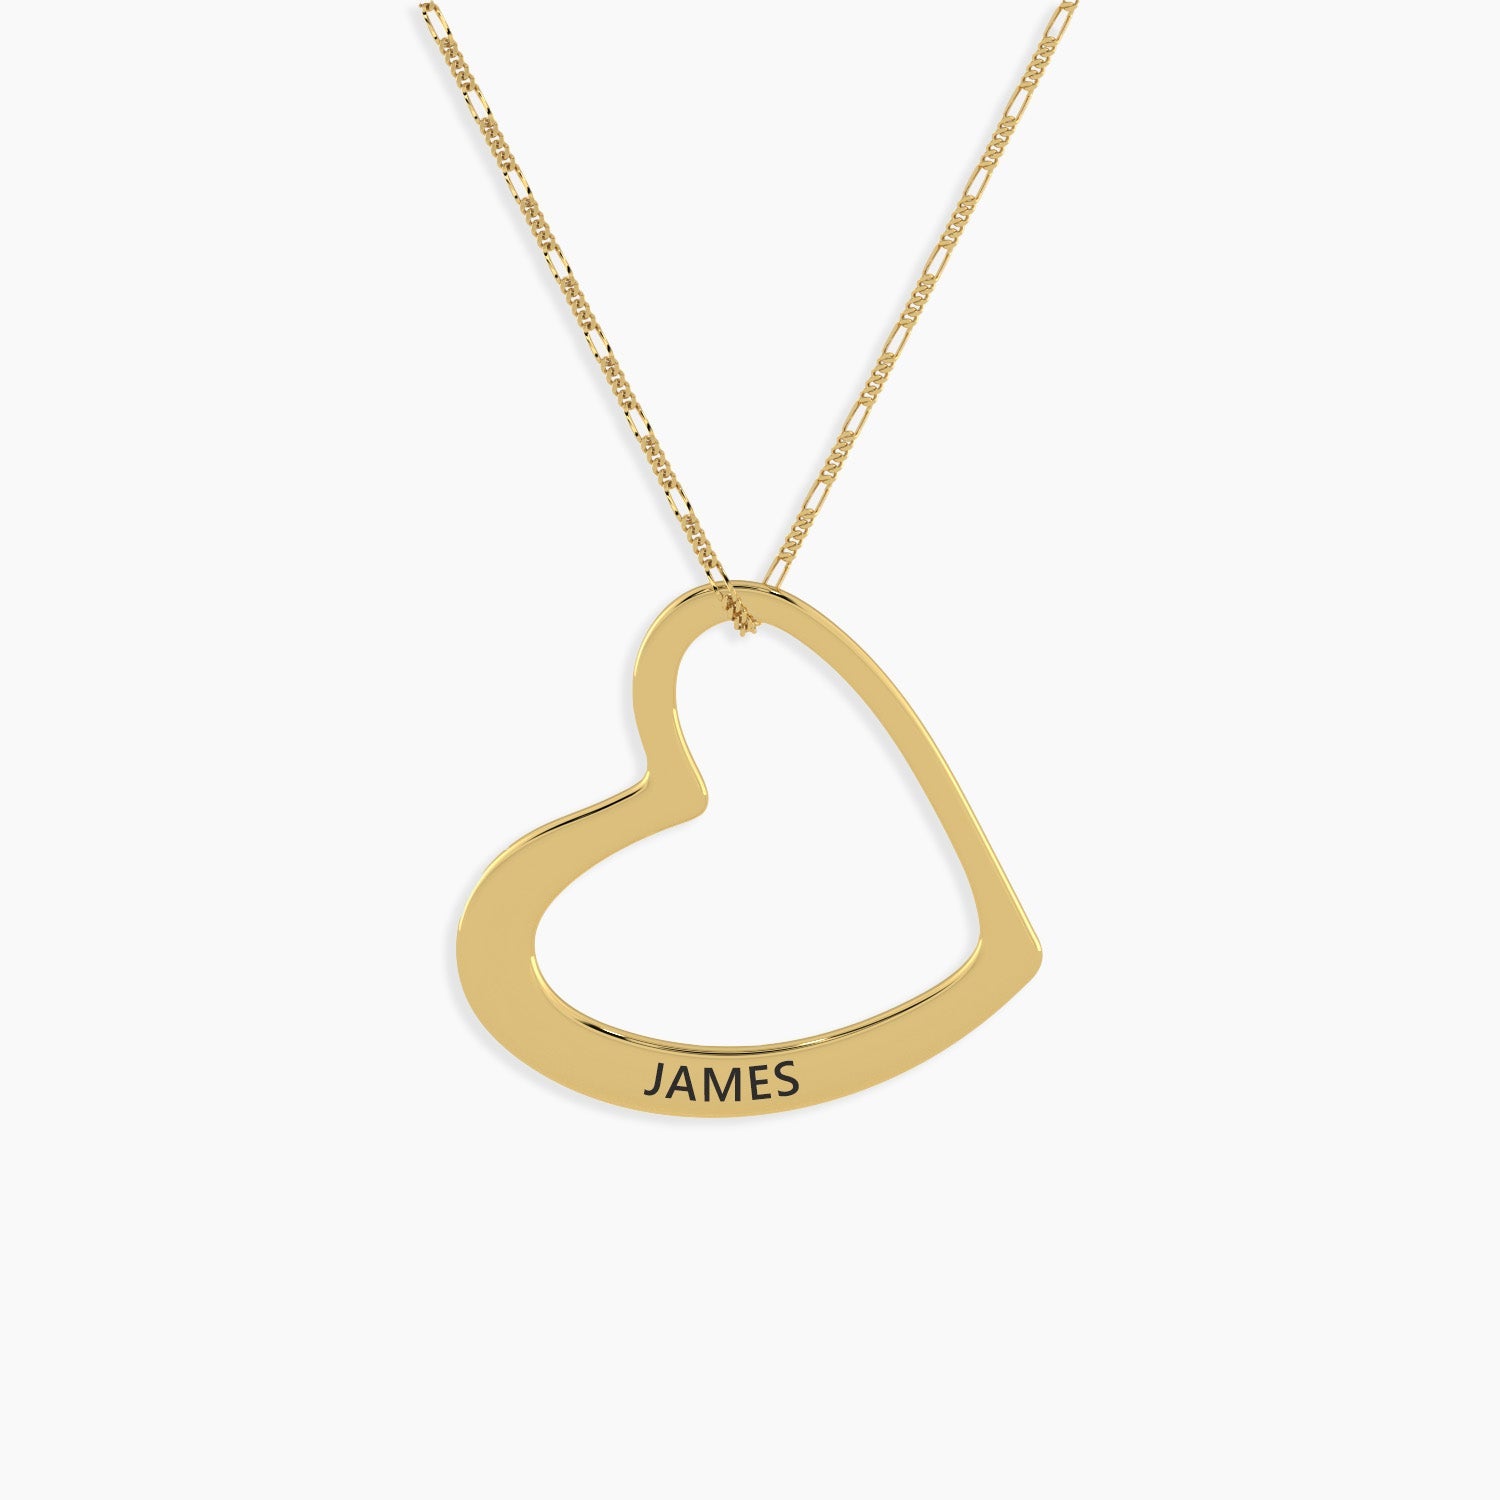 gold plated pendant with james engraved on